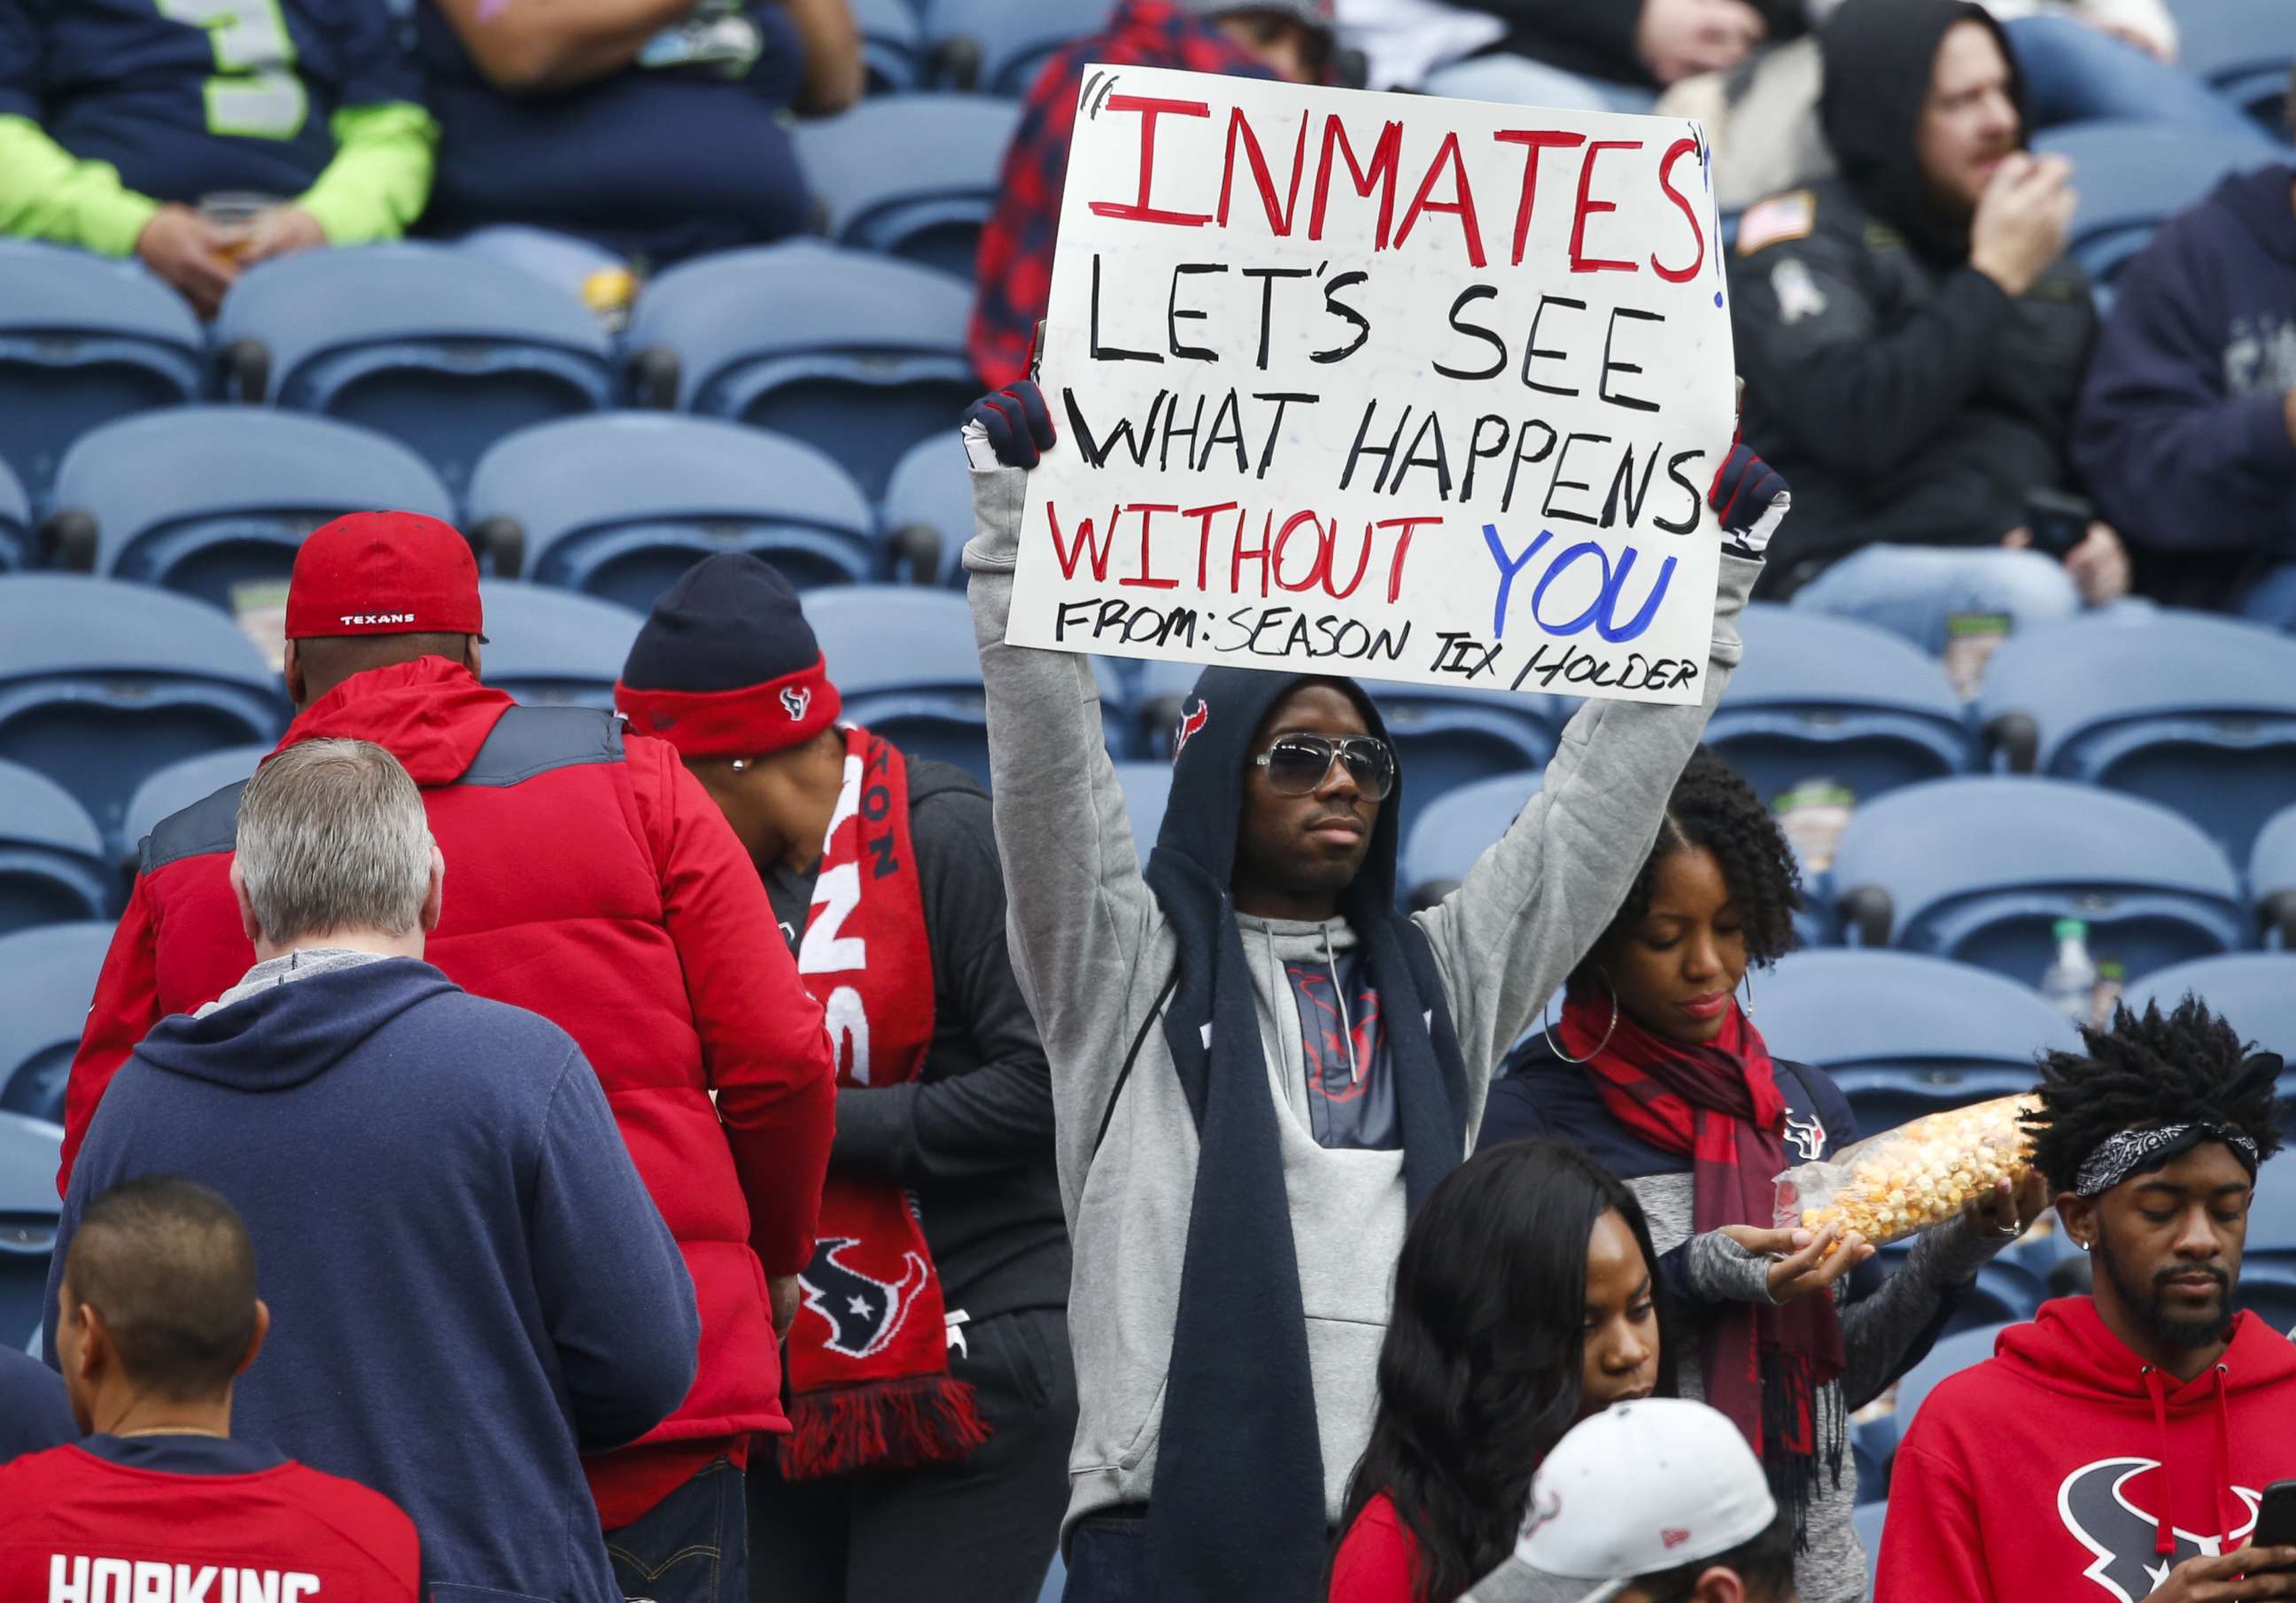 PHOTO: A Houston Texans fan holds a sign referring to Houston Texans owner Bob McNair's "inmates" comments before a game between the Houston Texans and Seattle Seahawks at CenturyLink Field on Oct. 29, 2017 in Seattle.